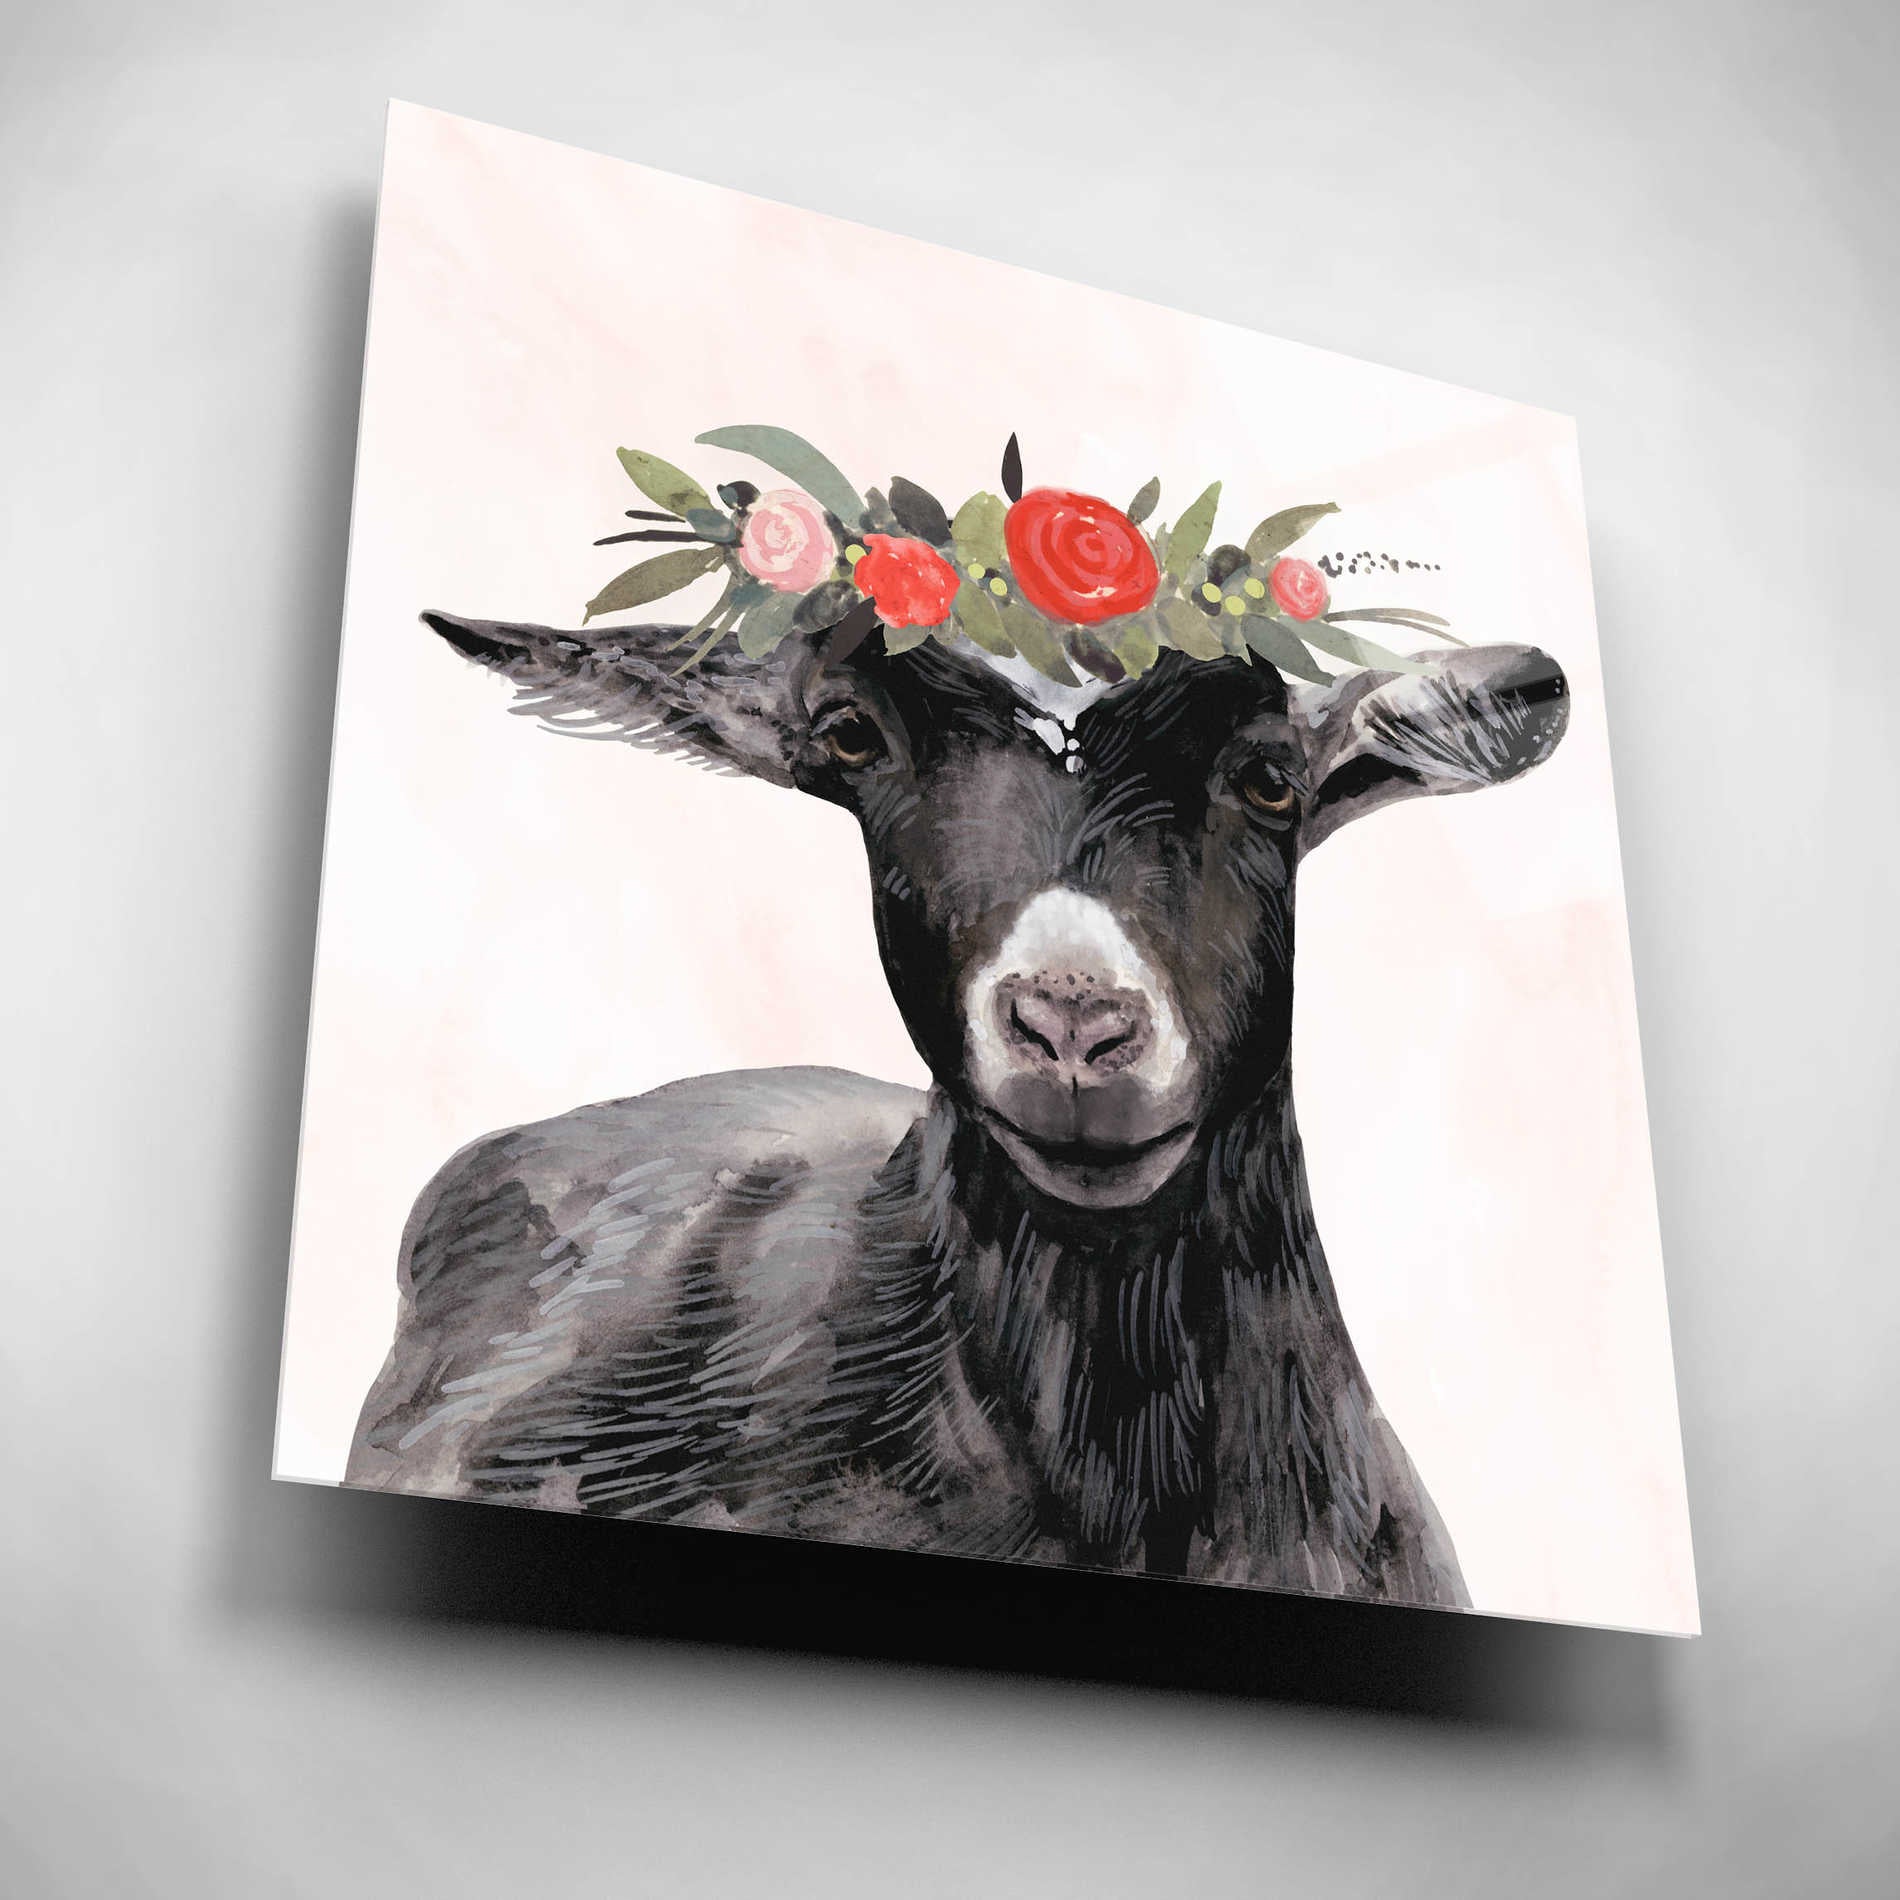 Epic Art 'Garden Goat III' by Victoria Borges, Acrylic Glass Wall Art,12x12